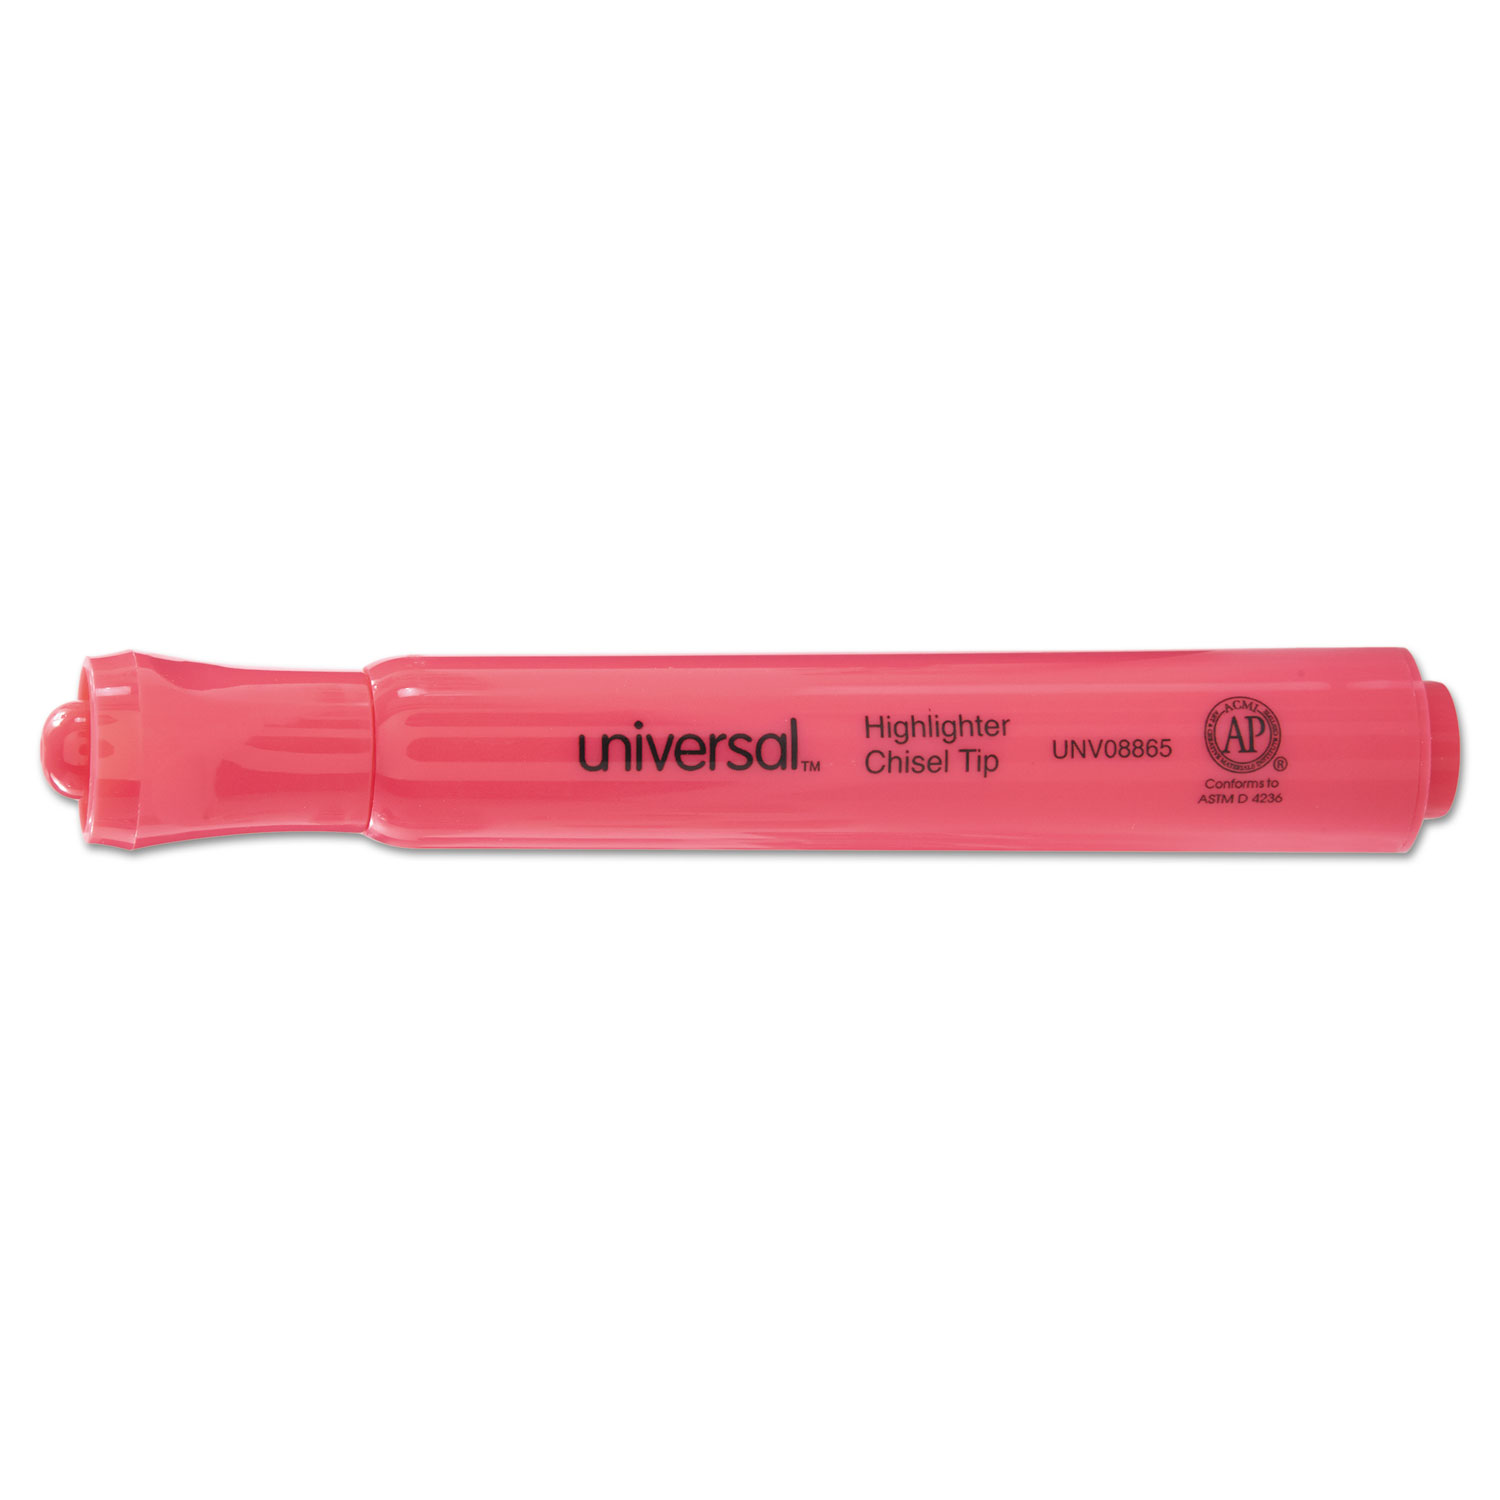 UNIVERSAL HIGHLIGHTER ASSORTED 5C COLOR